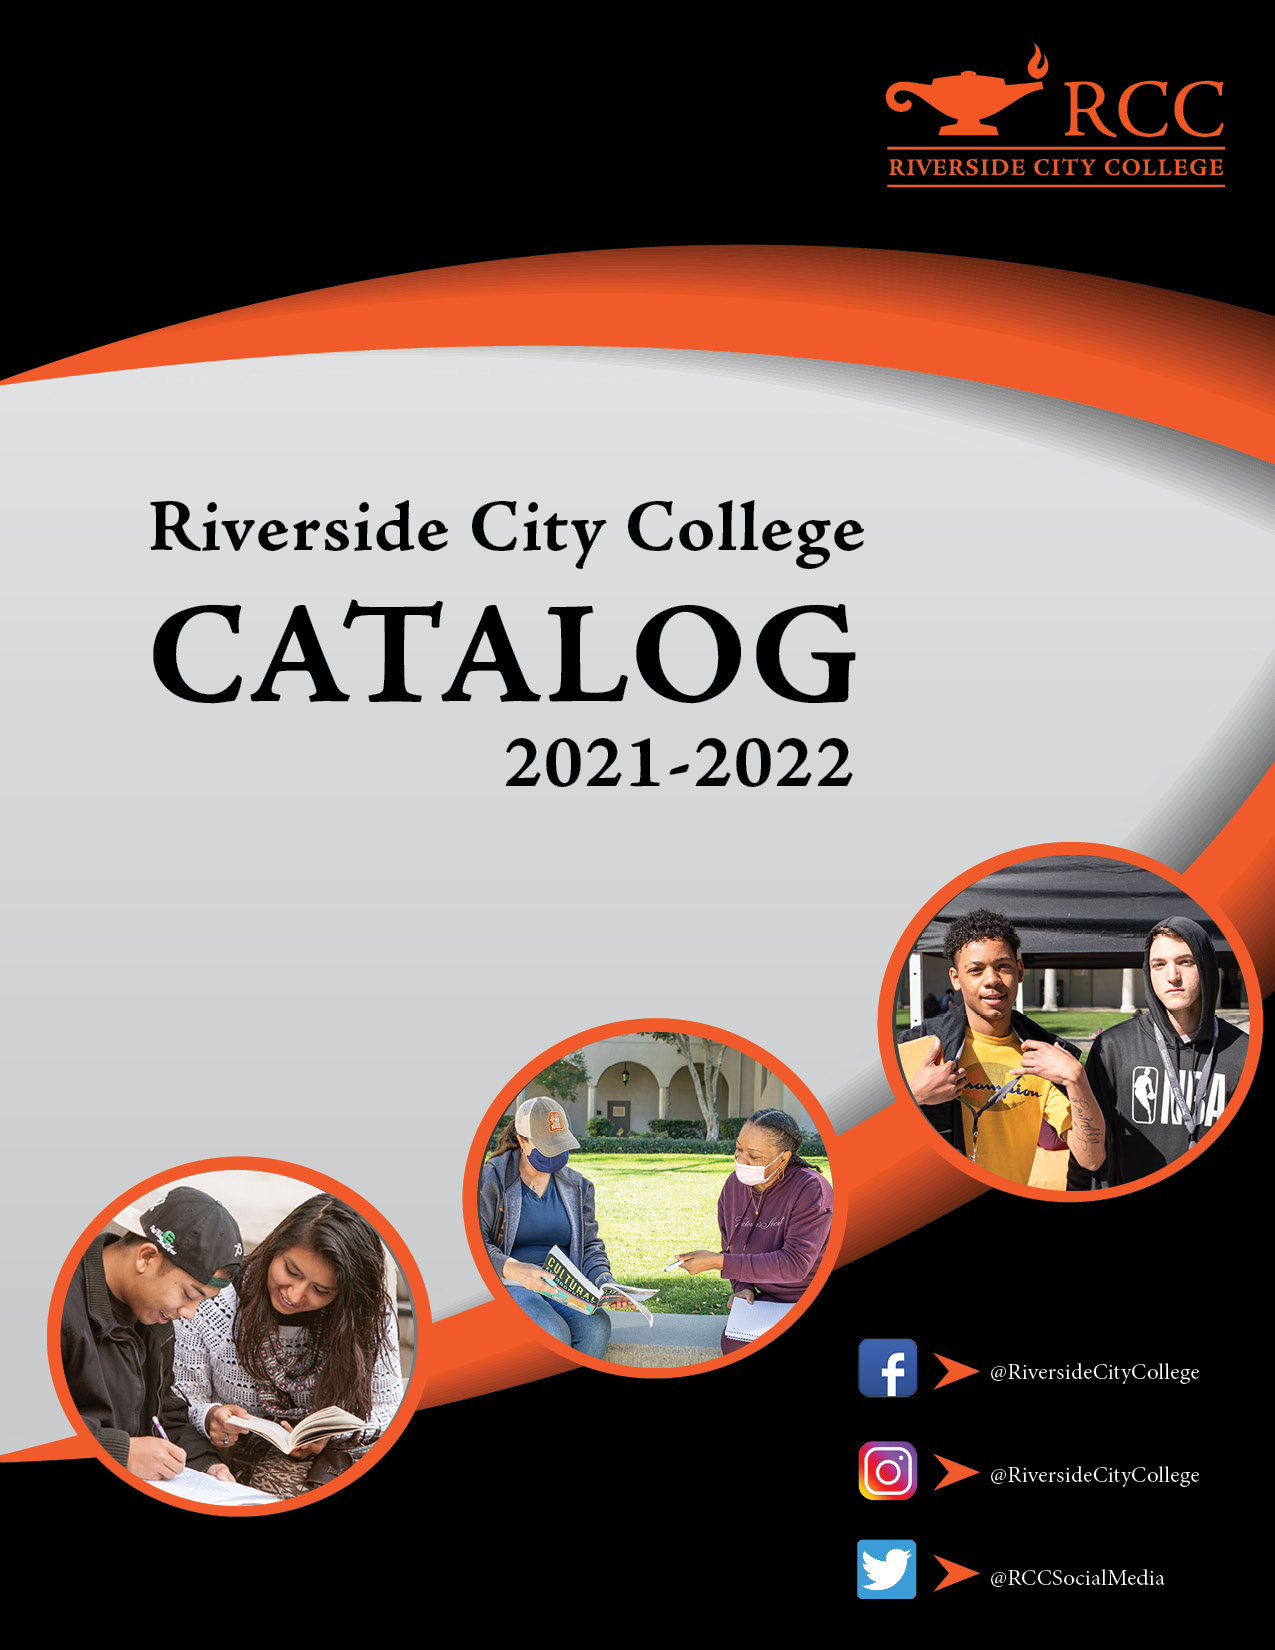 21-22 catalog cover with circles of students